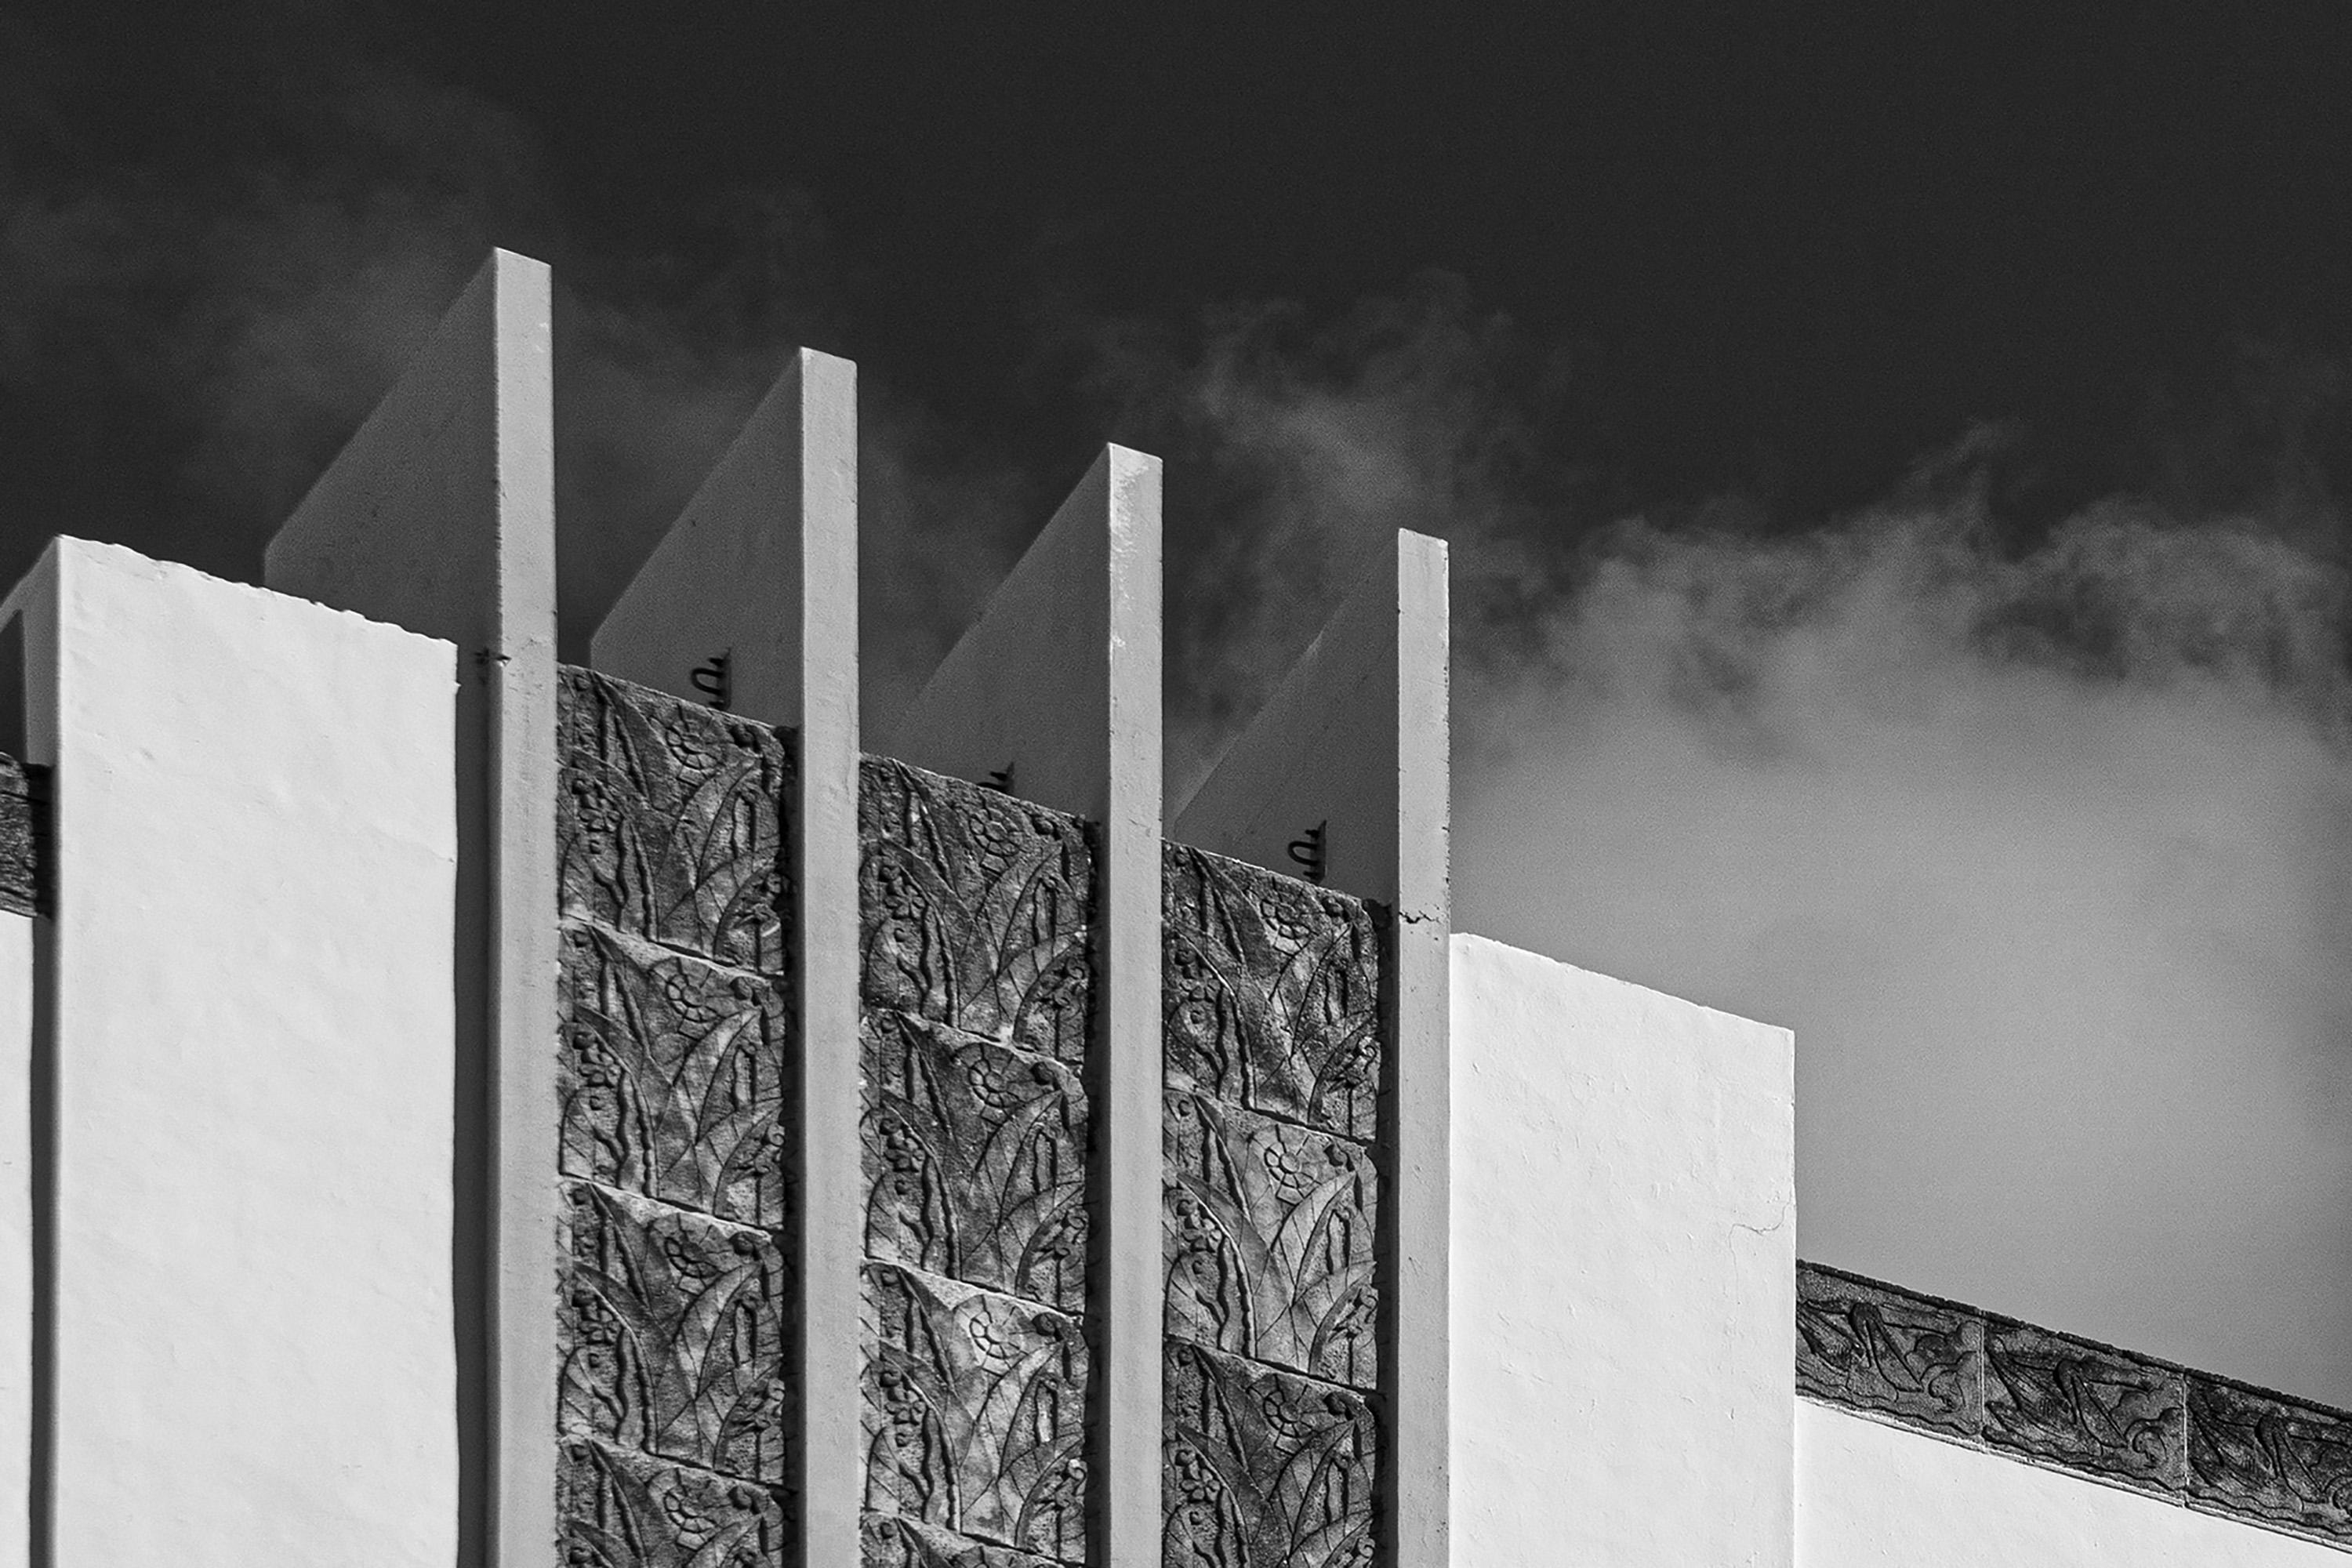 Thirties Building with Sky, Black and White Architecture, Miami Beach Art Deco  - Art Nouveau Photograph by Kind of Cyan